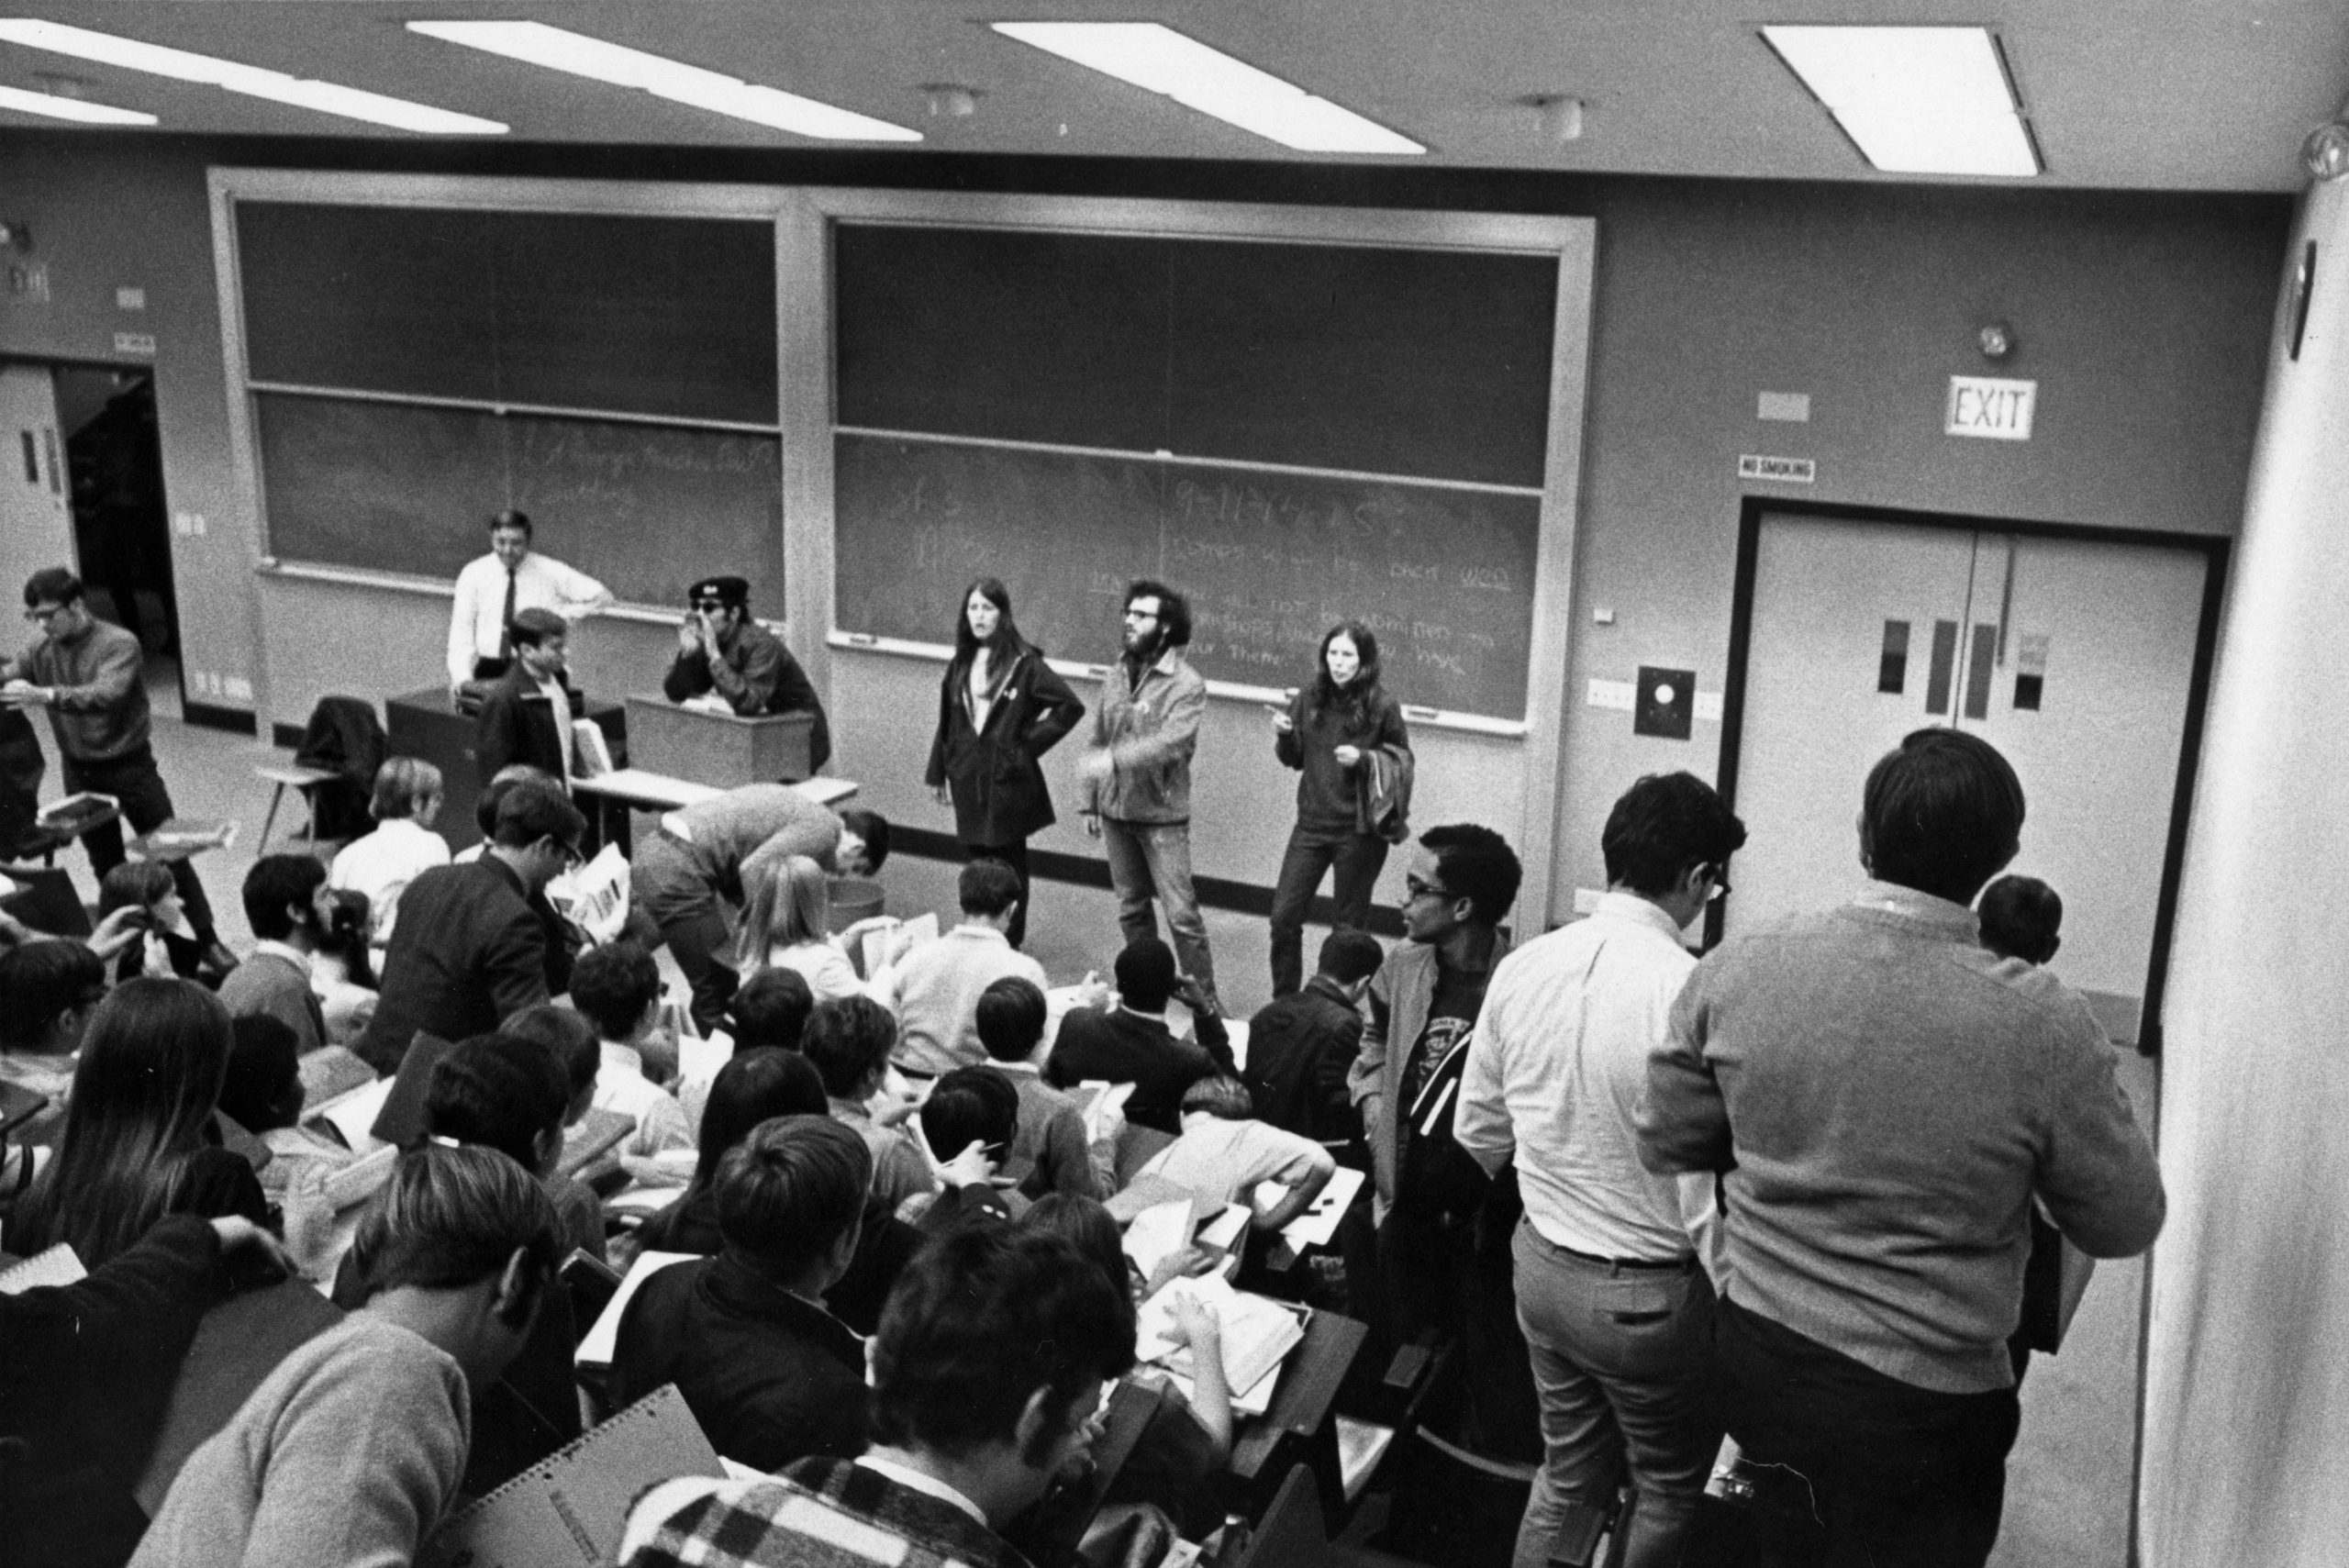 Students for a Democratic Society protest in a Marquette classroom, 1970